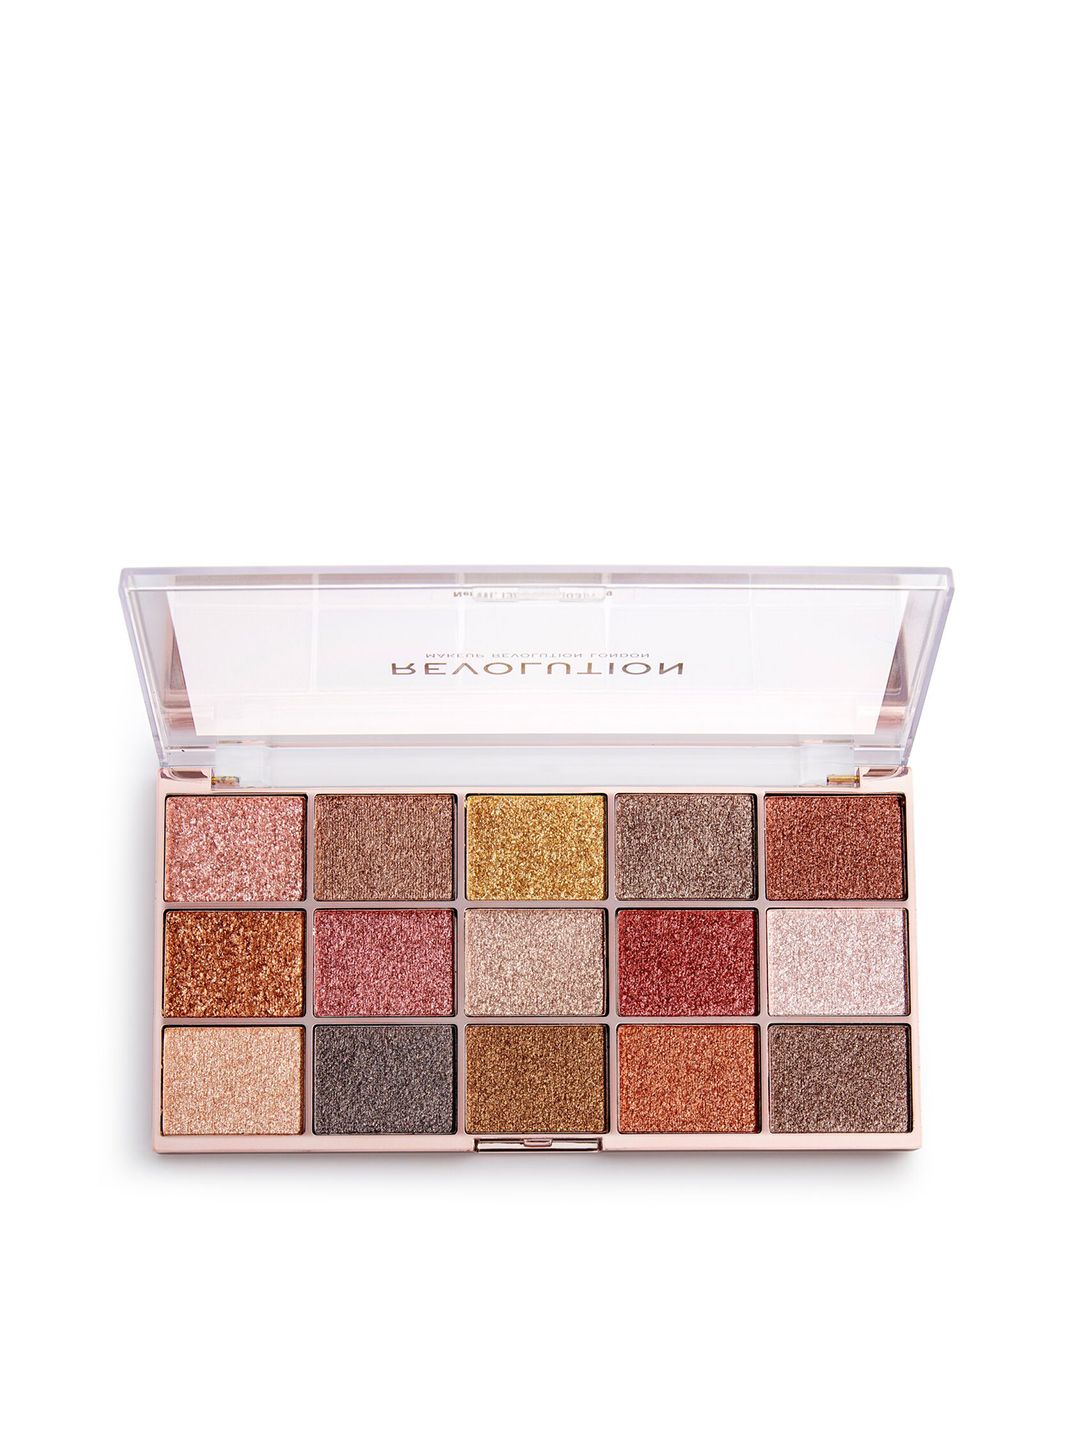 Makeup Revolution London Eyeshadow Palette - Foil Frenzy Fusion 30 g Price in India